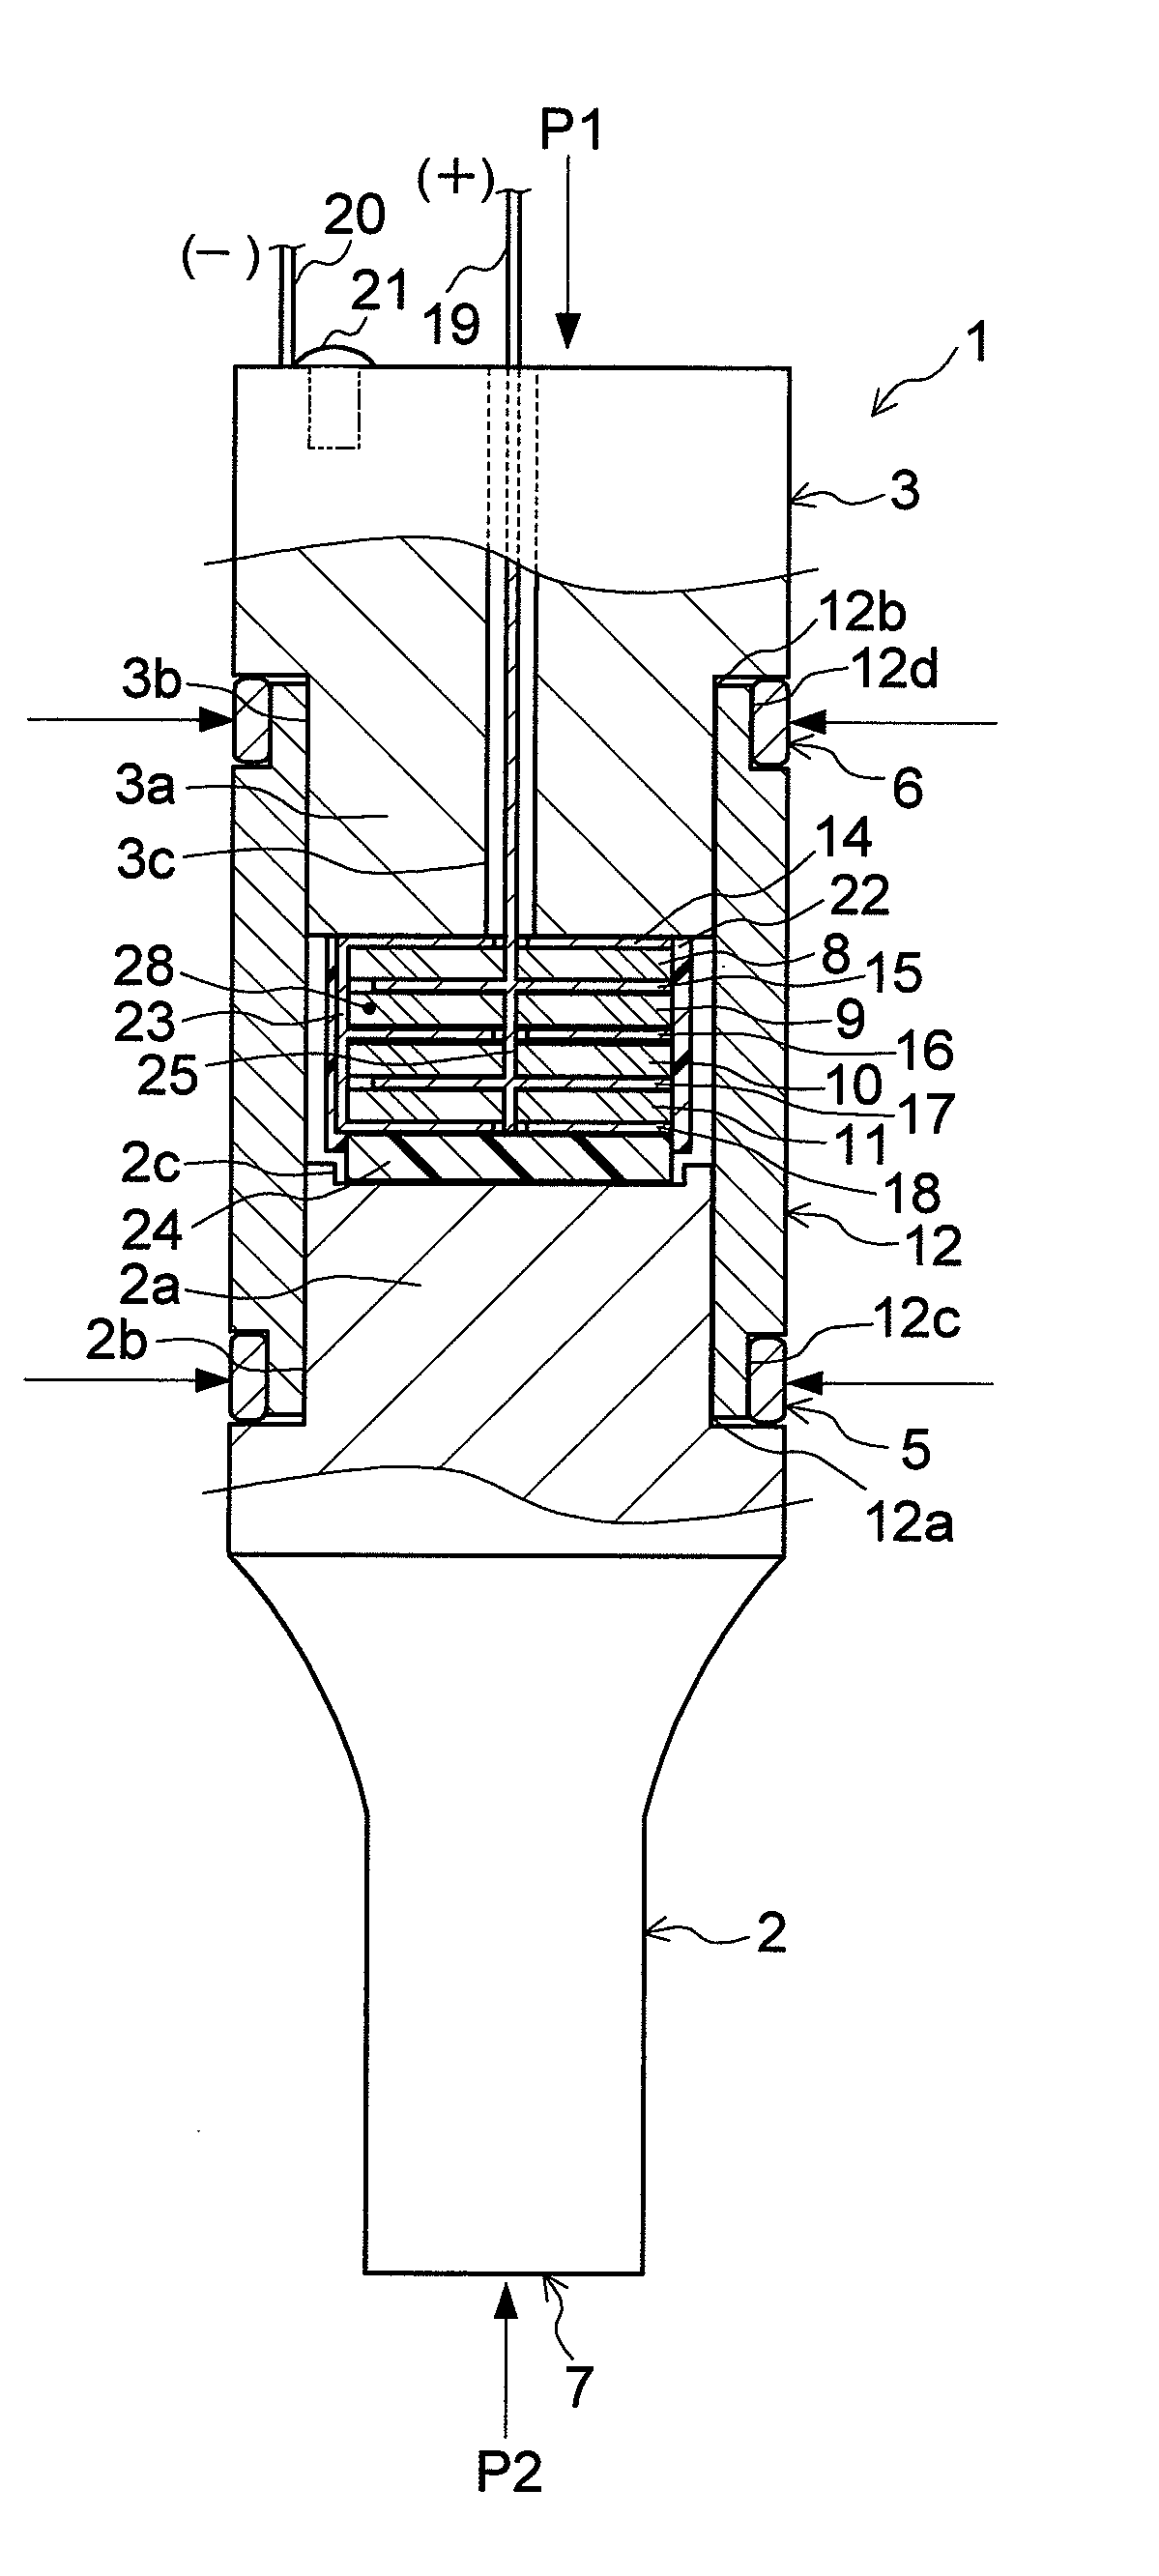 Ultrasonic transducer which is either crimped or welded during assembly